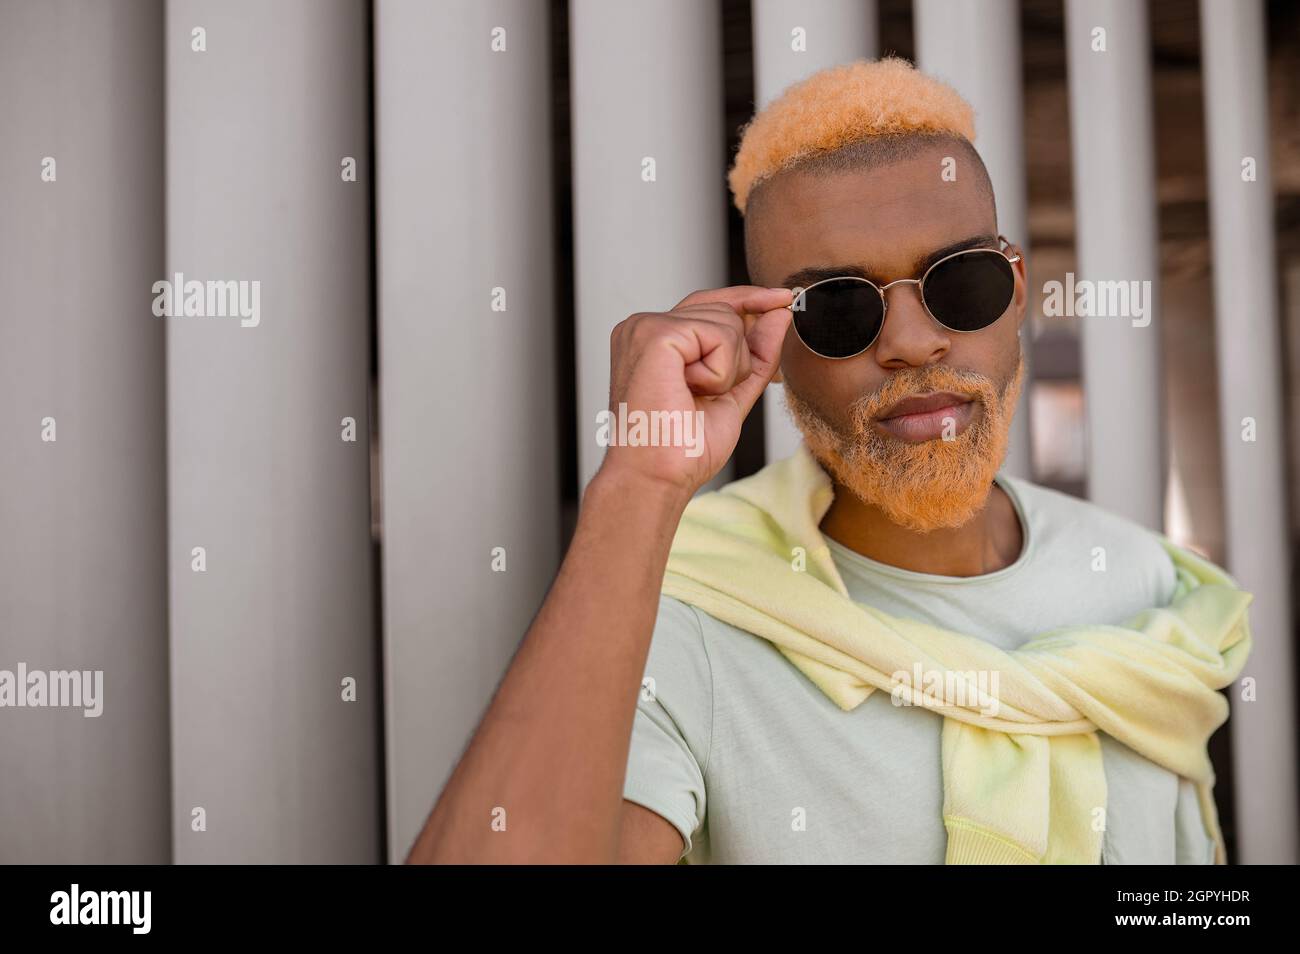 A bearded extravagant young man in sunglasses Stock Photo